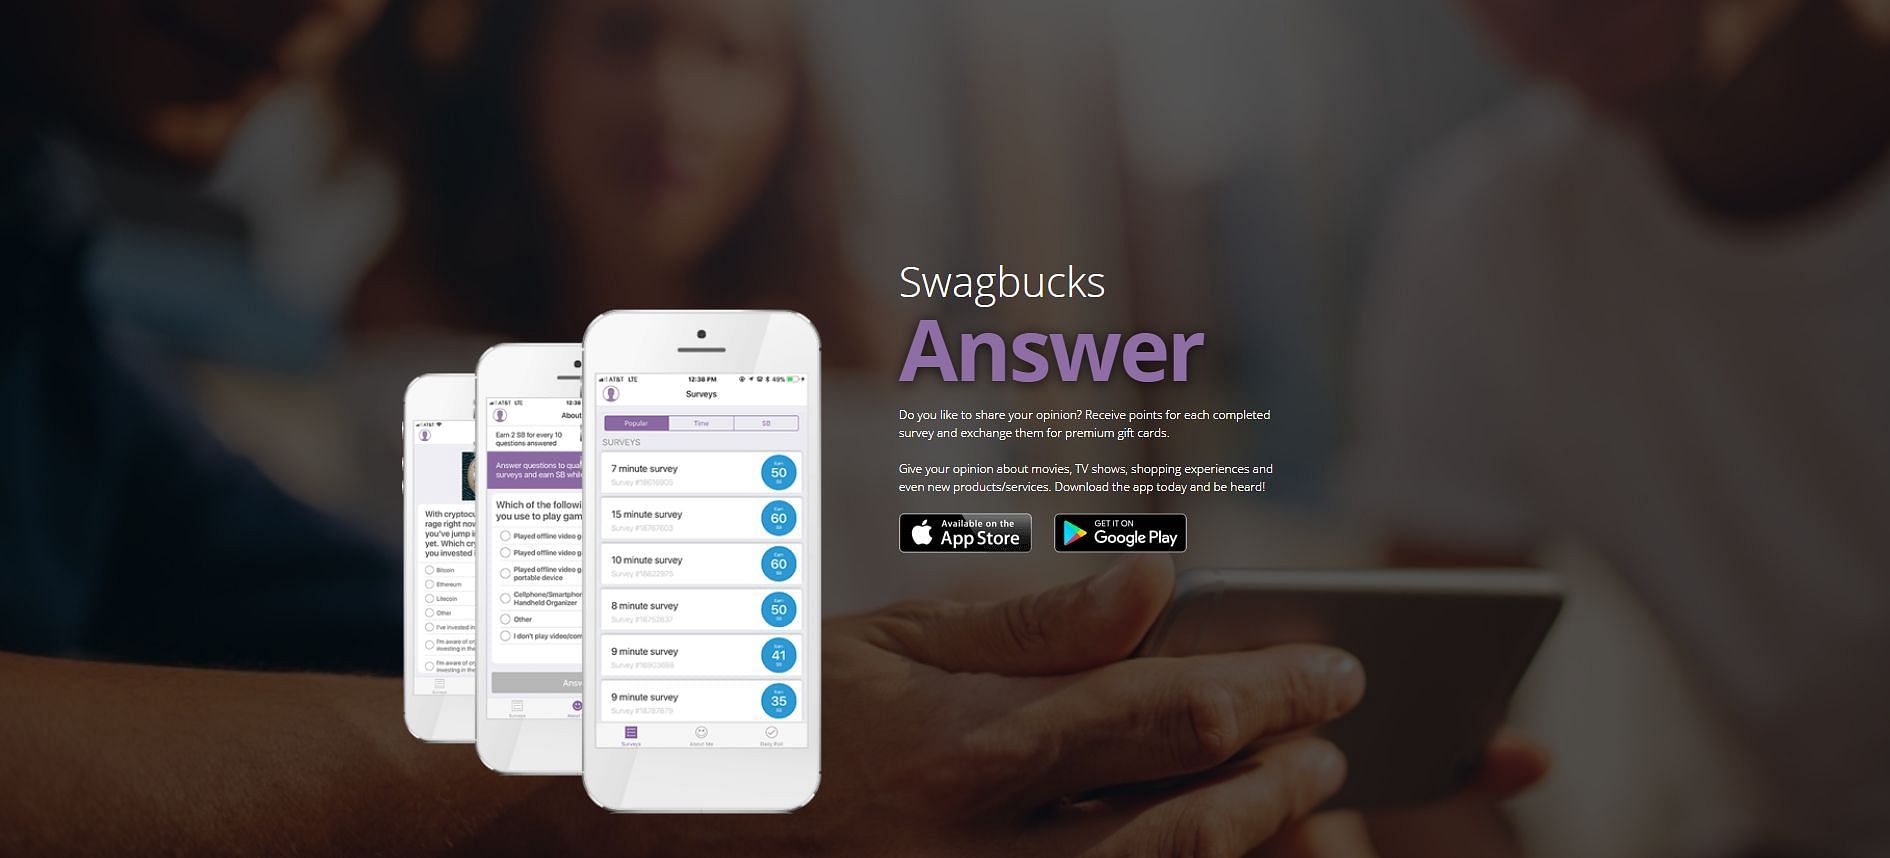 The app is available on both Android and iOS devices (Image via Swagbucks)